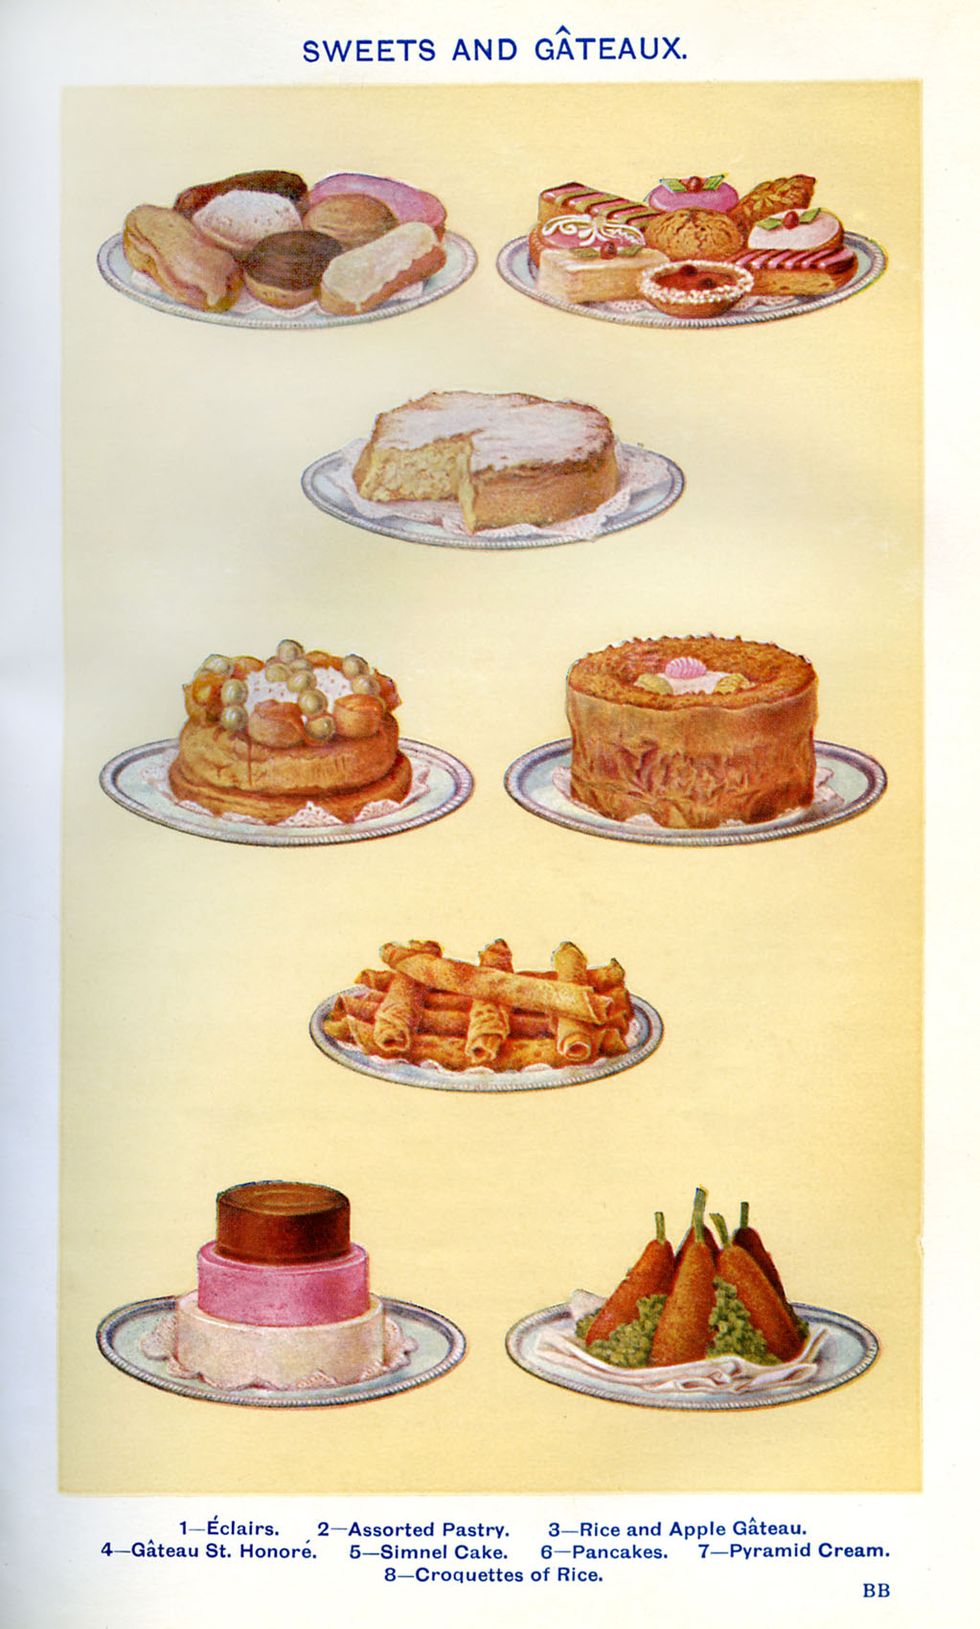 mrs beeton s cookery book    sweets and gateaux eclairs, assorted pastry, rice and apple gateau, gateau st honore, simnel cake, pancakes, pyramid cream, croquettes of rice new edition of the cookerybook, first published 1861 isabella mary beeton, english author, 12 march 1836  6 february 1865  photo by culture clubgetty images  local caption